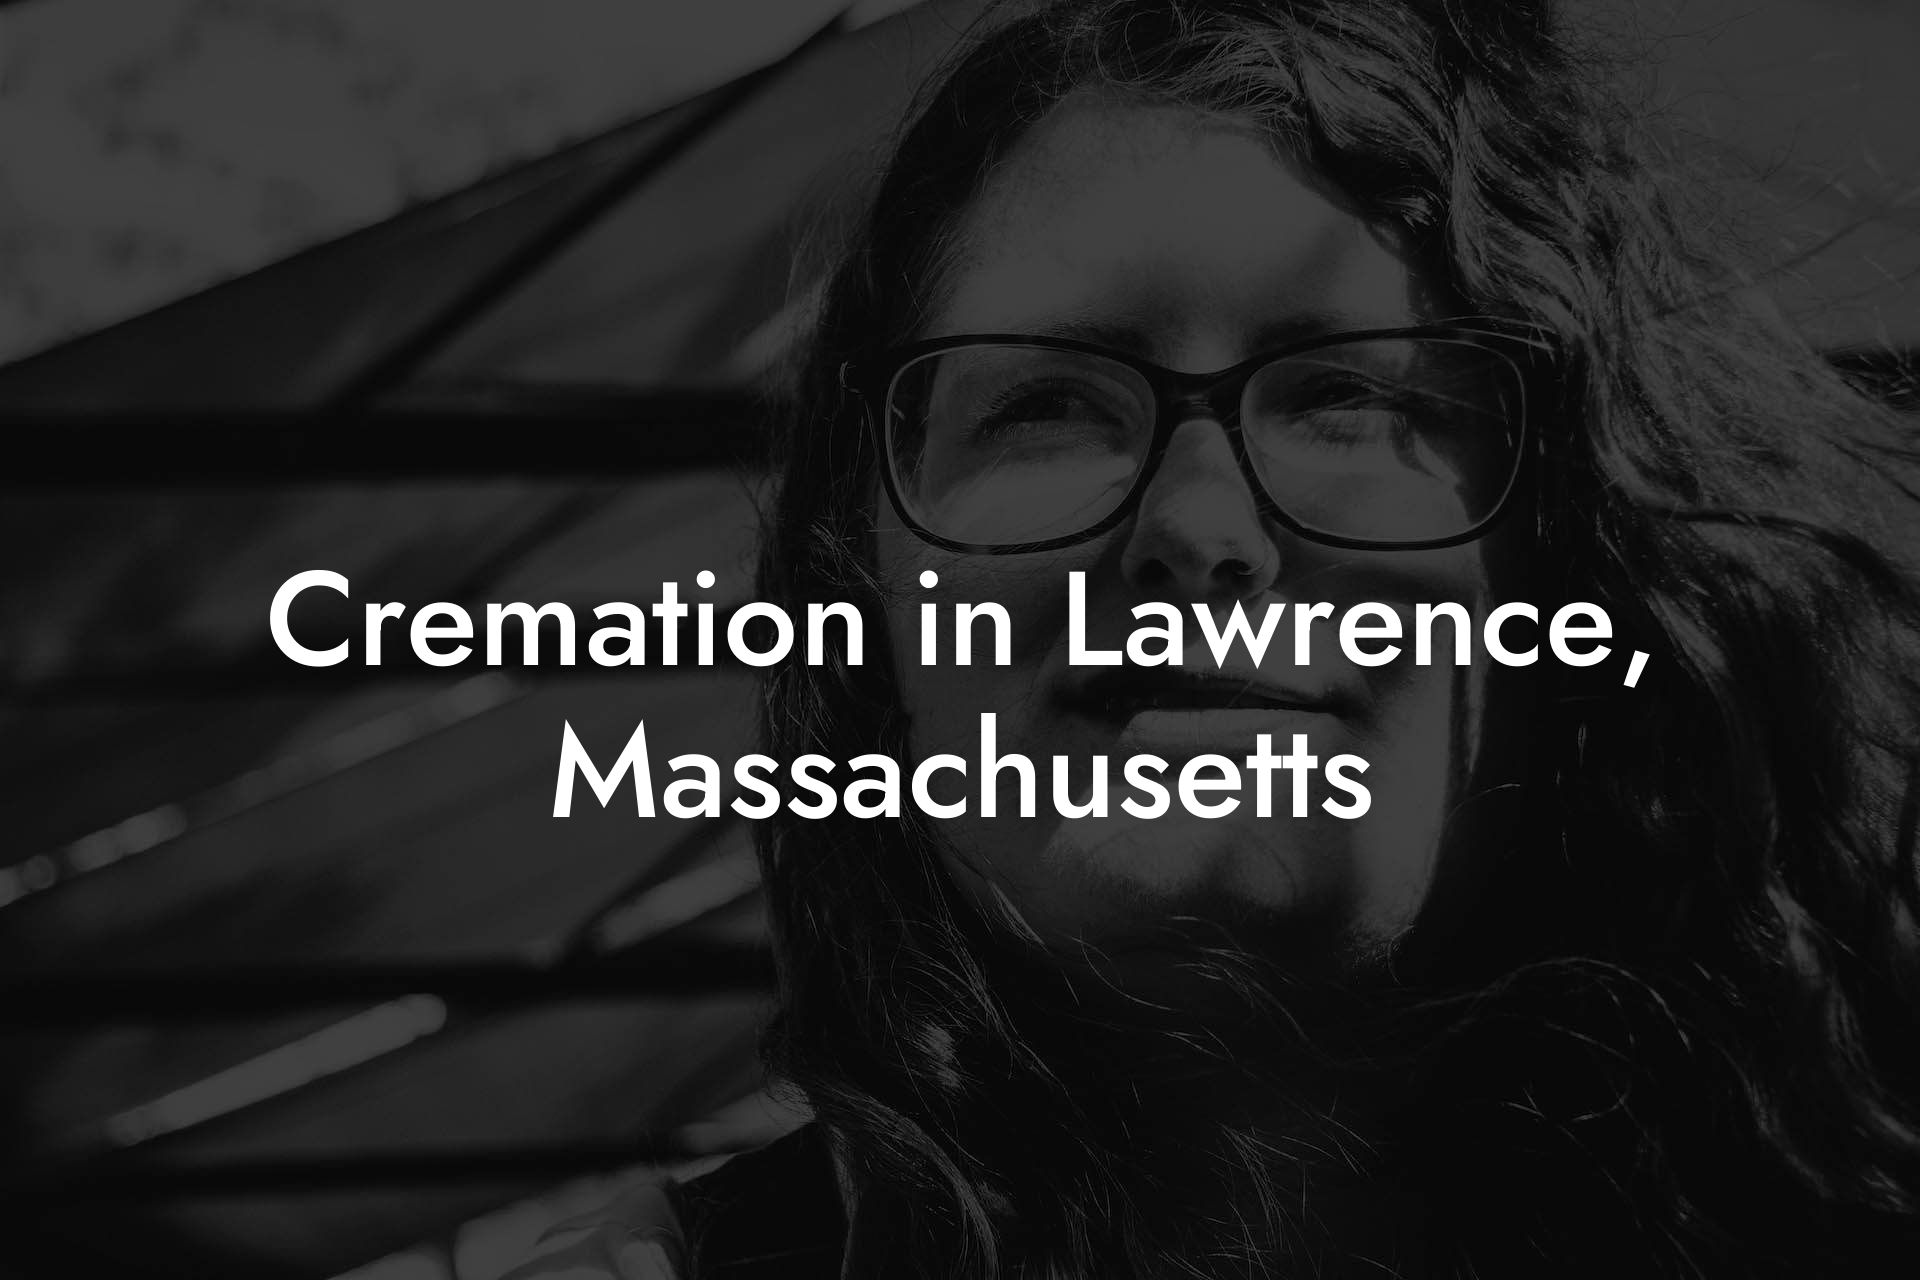 Cremation in Lawrence, Massachusetts